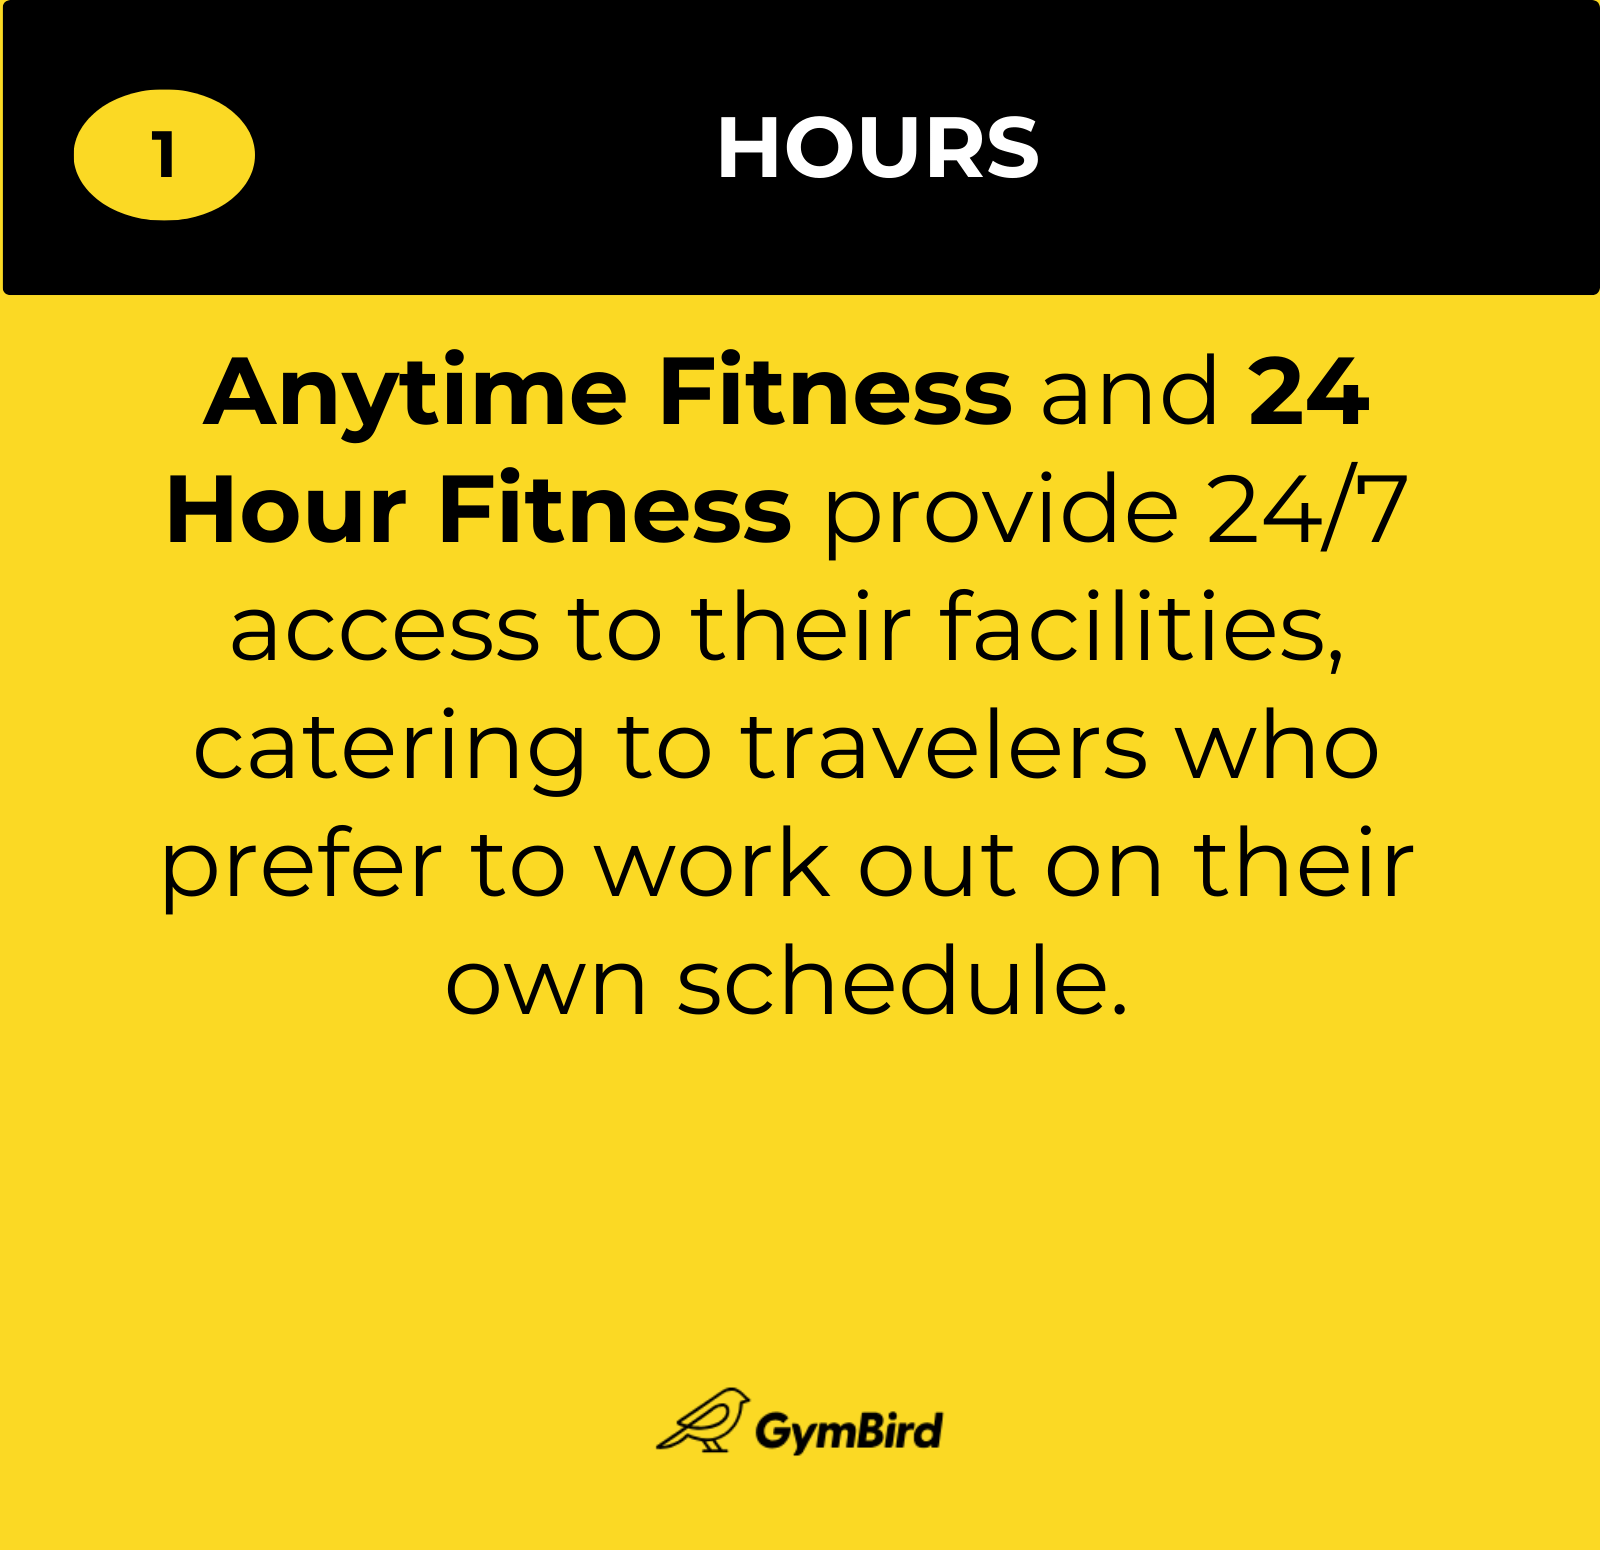 how to choose a gym for travelers - hours